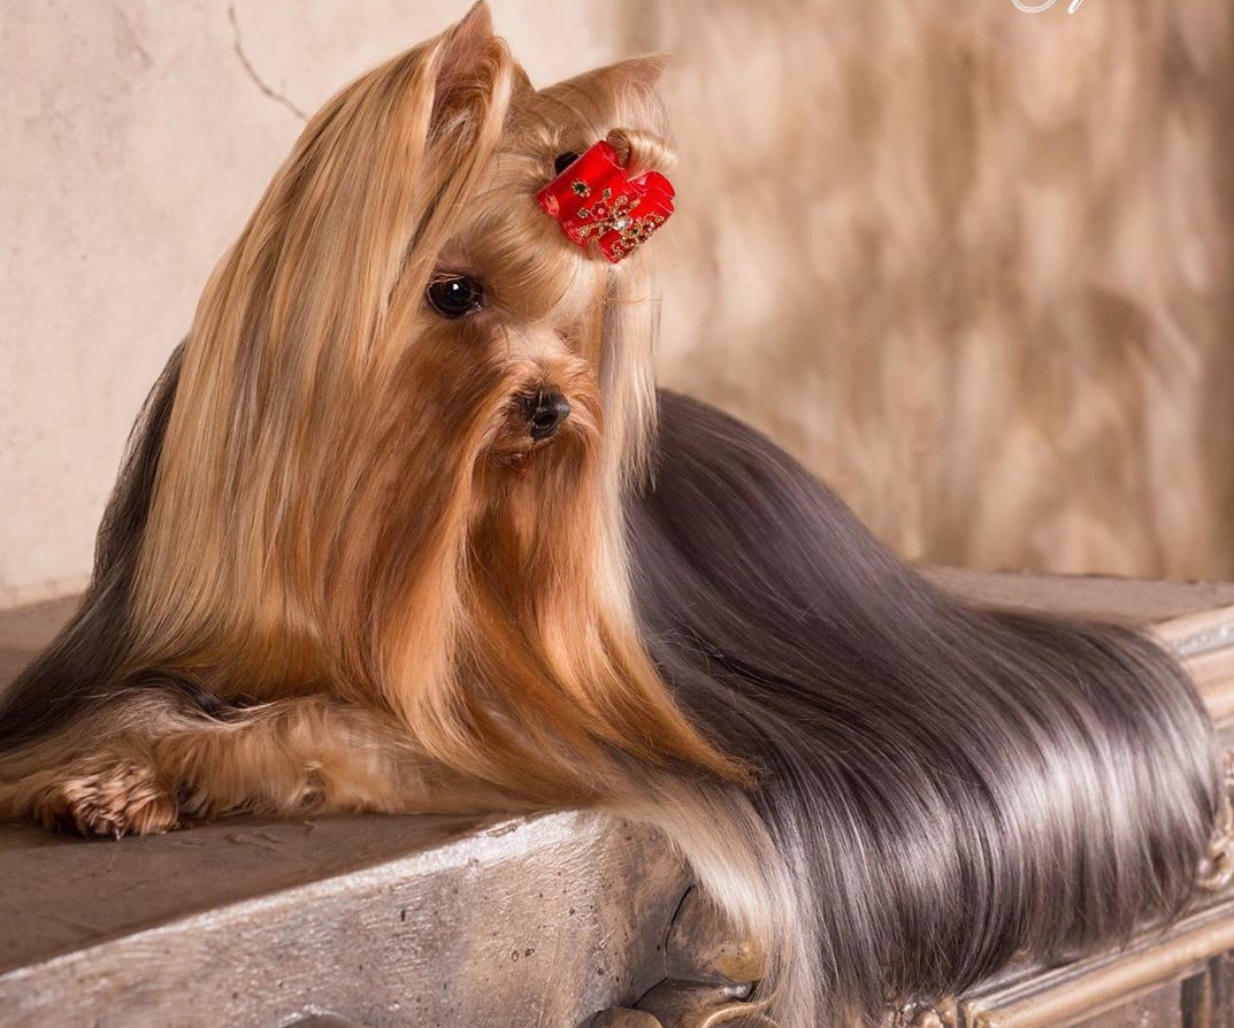 A Yorkshire Terrier with a long shiny hair lying on counter top while wearing a red ribbon tie on top of her head